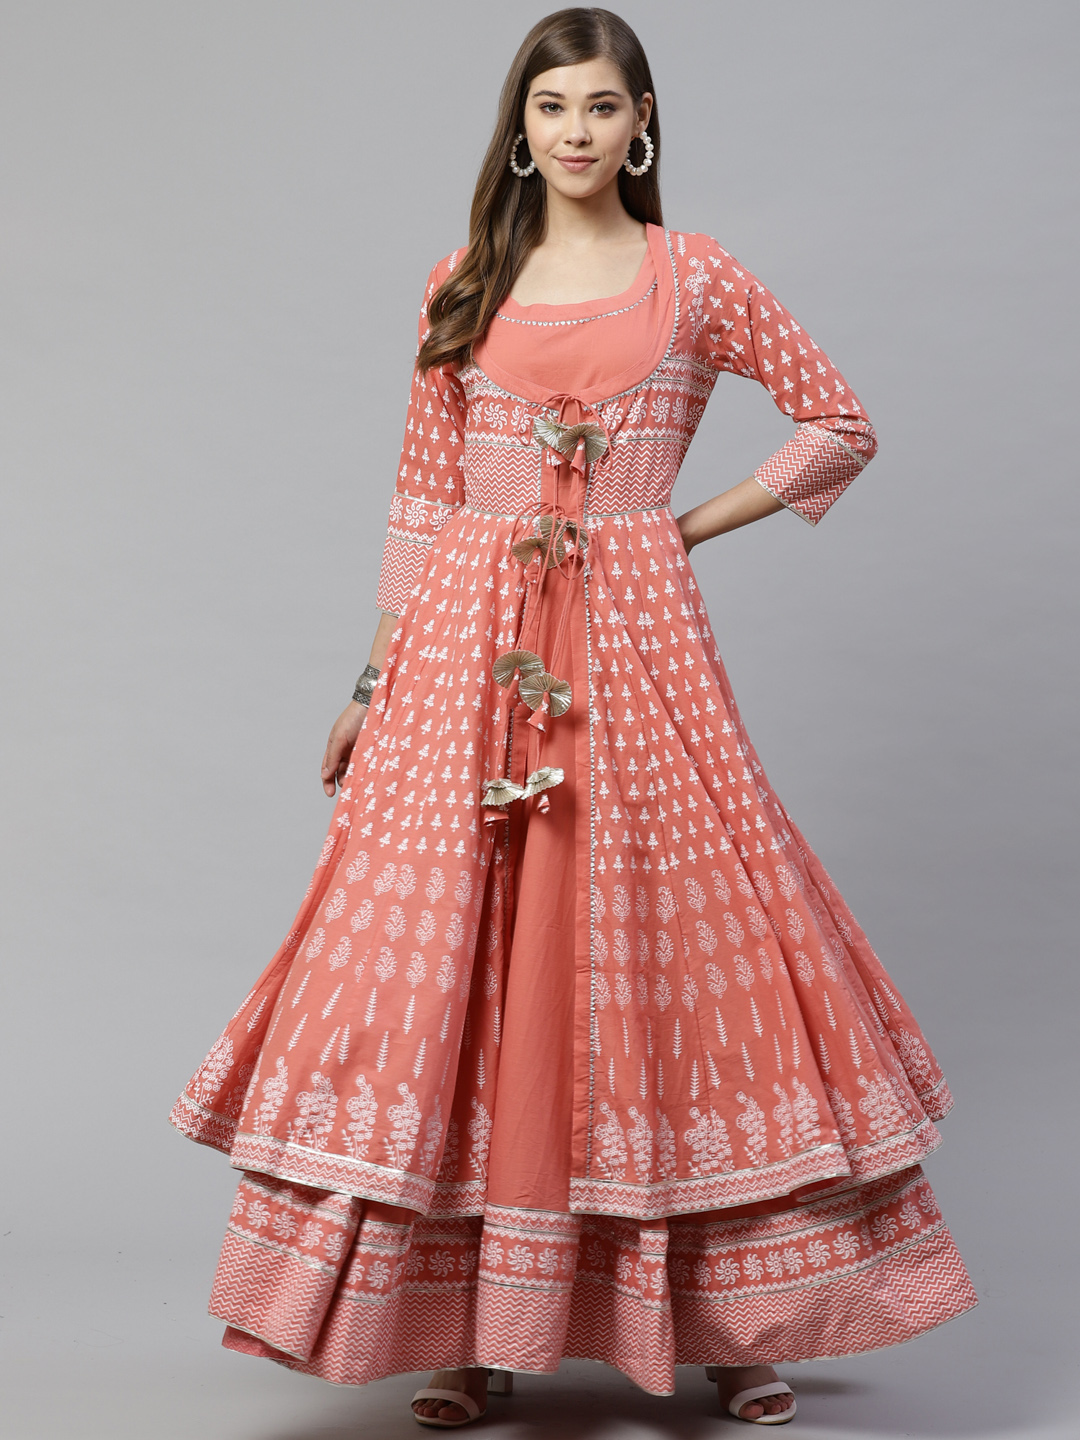 Girls Gown In Chandrawal